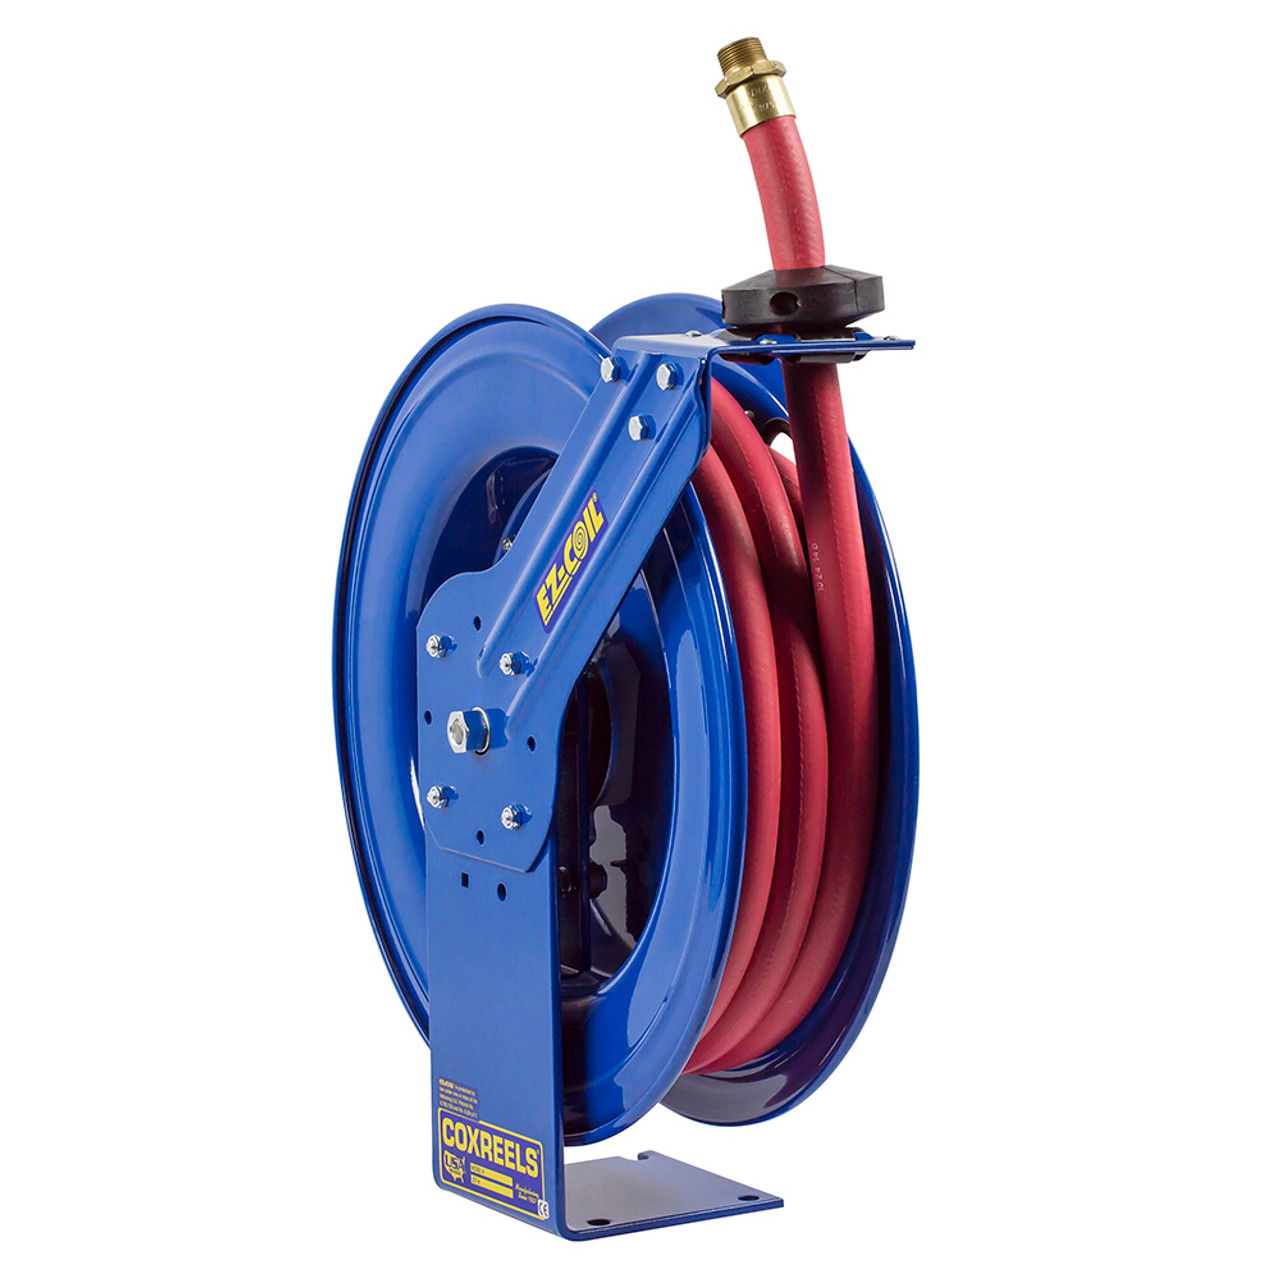 Stainless Steel Air Hose Reels - Hose, Cord and Cable Reels